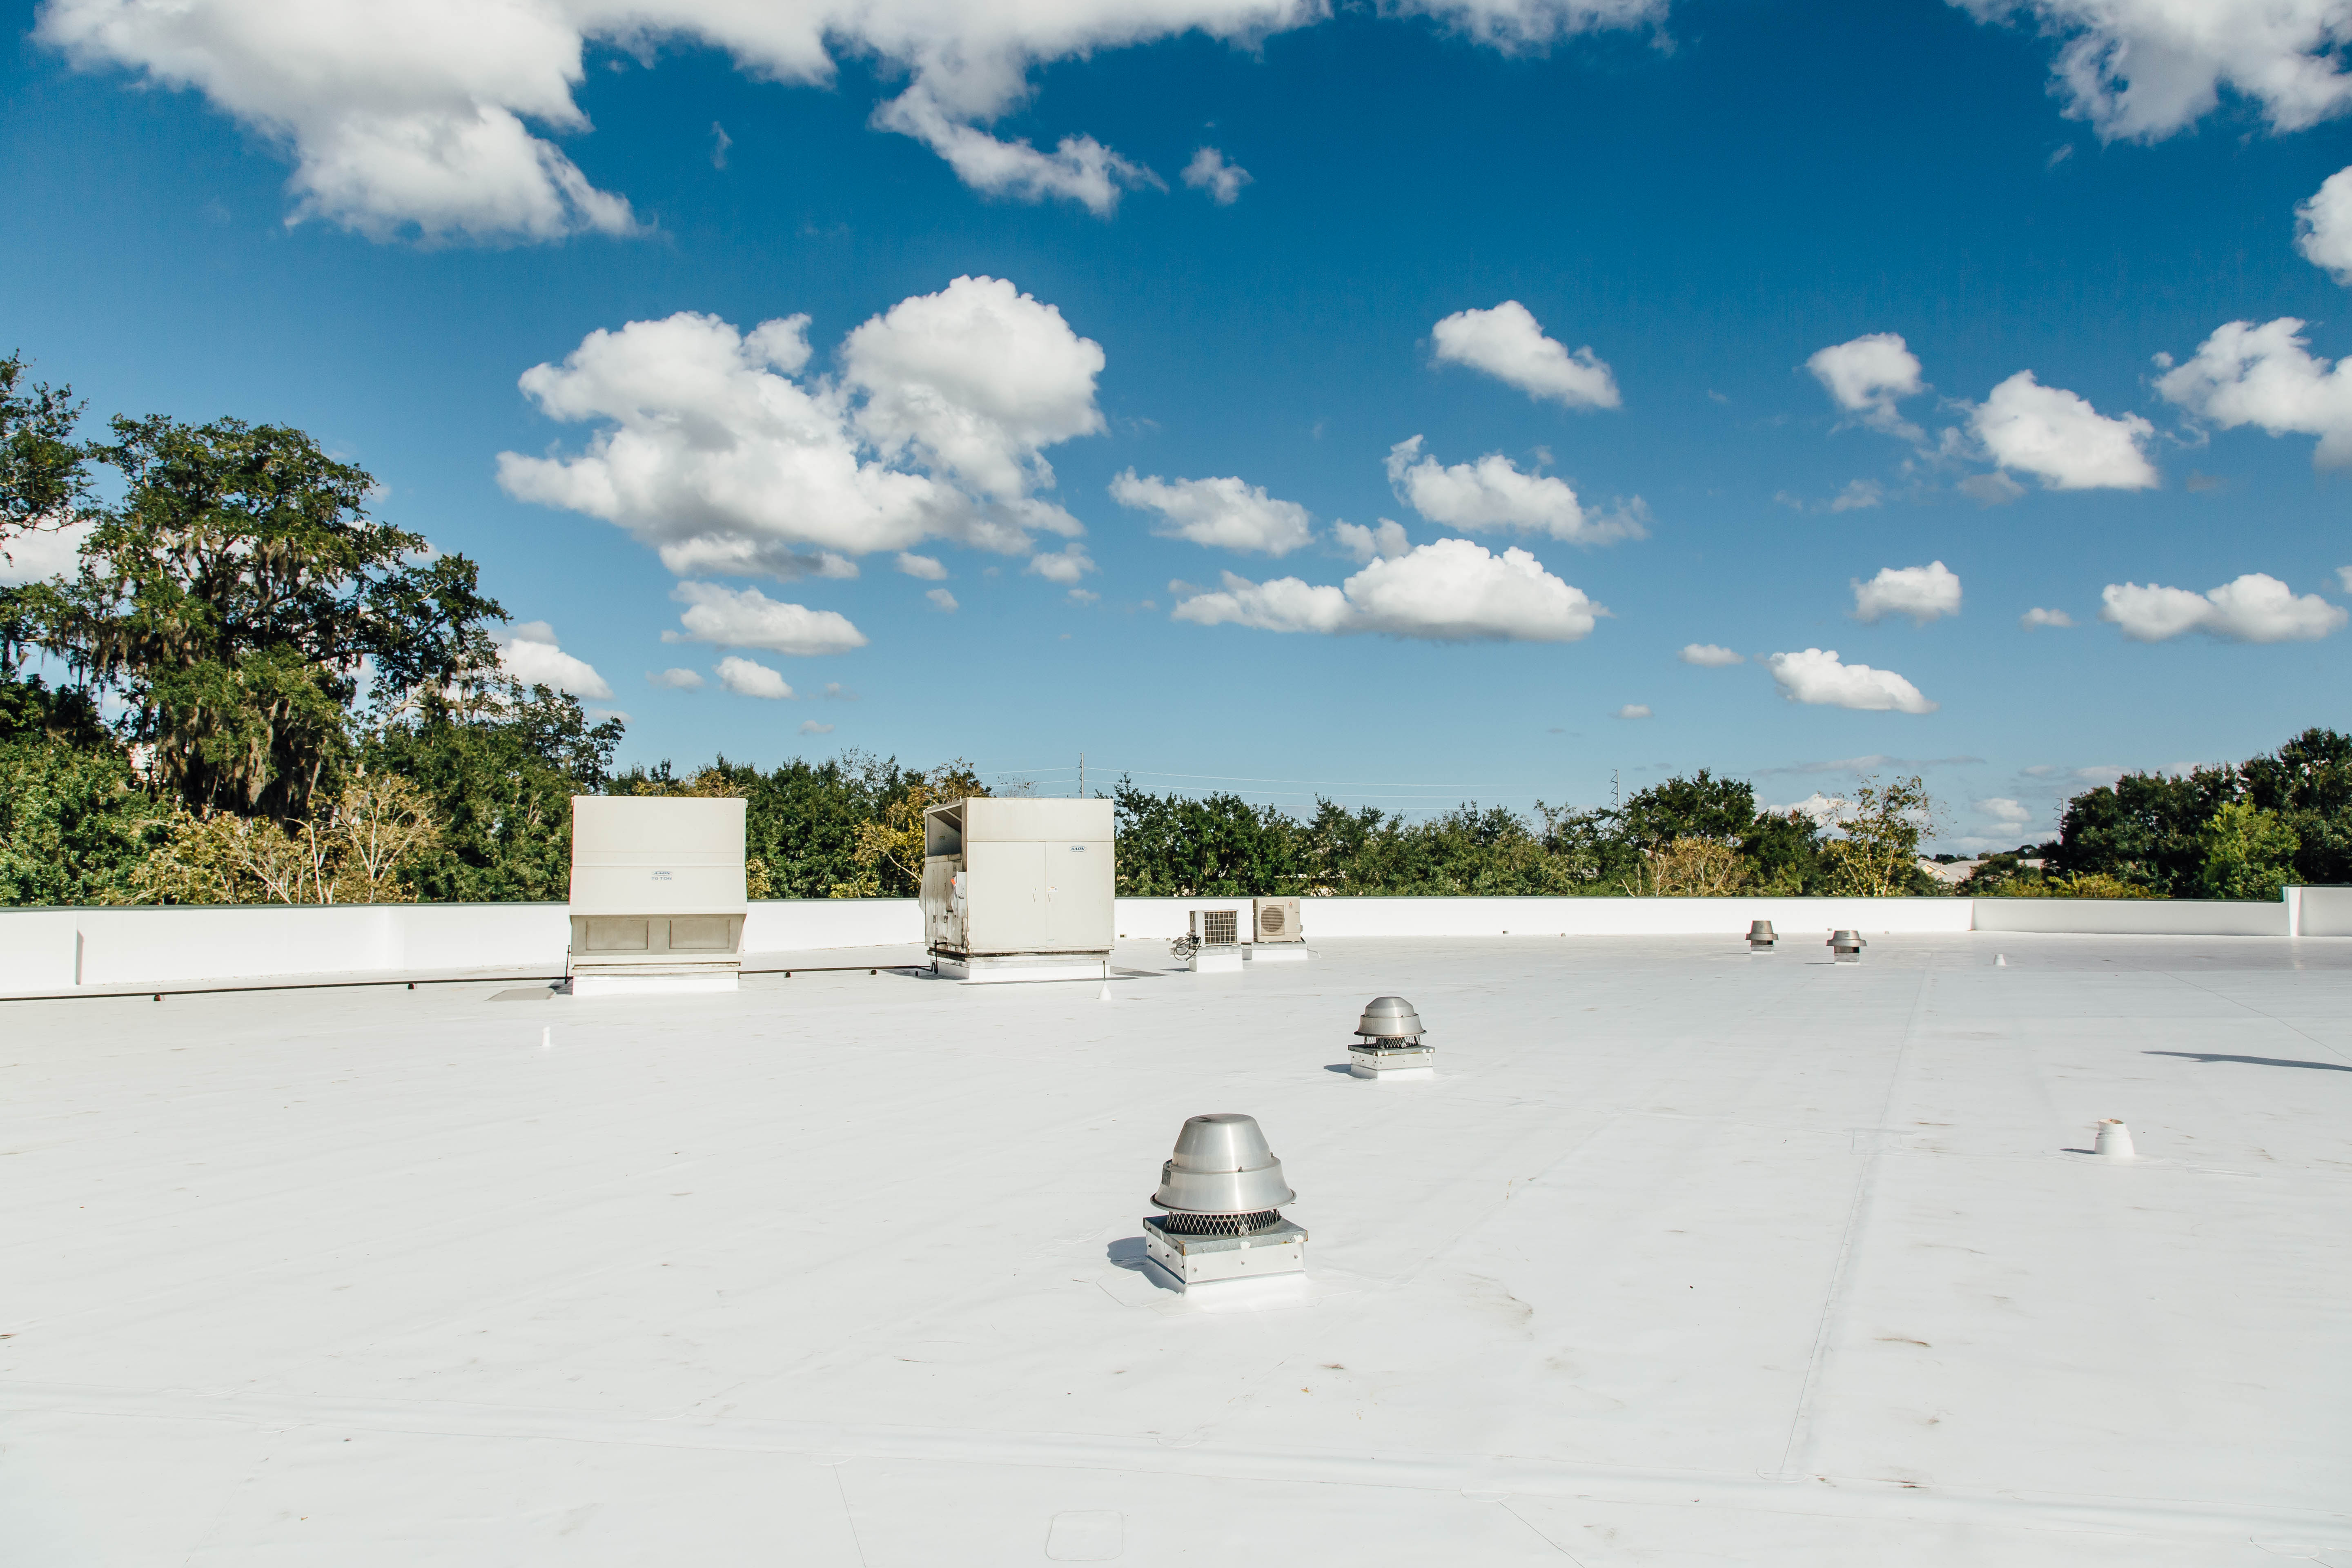 Value Engineering to Control Commercial Roofing Variables